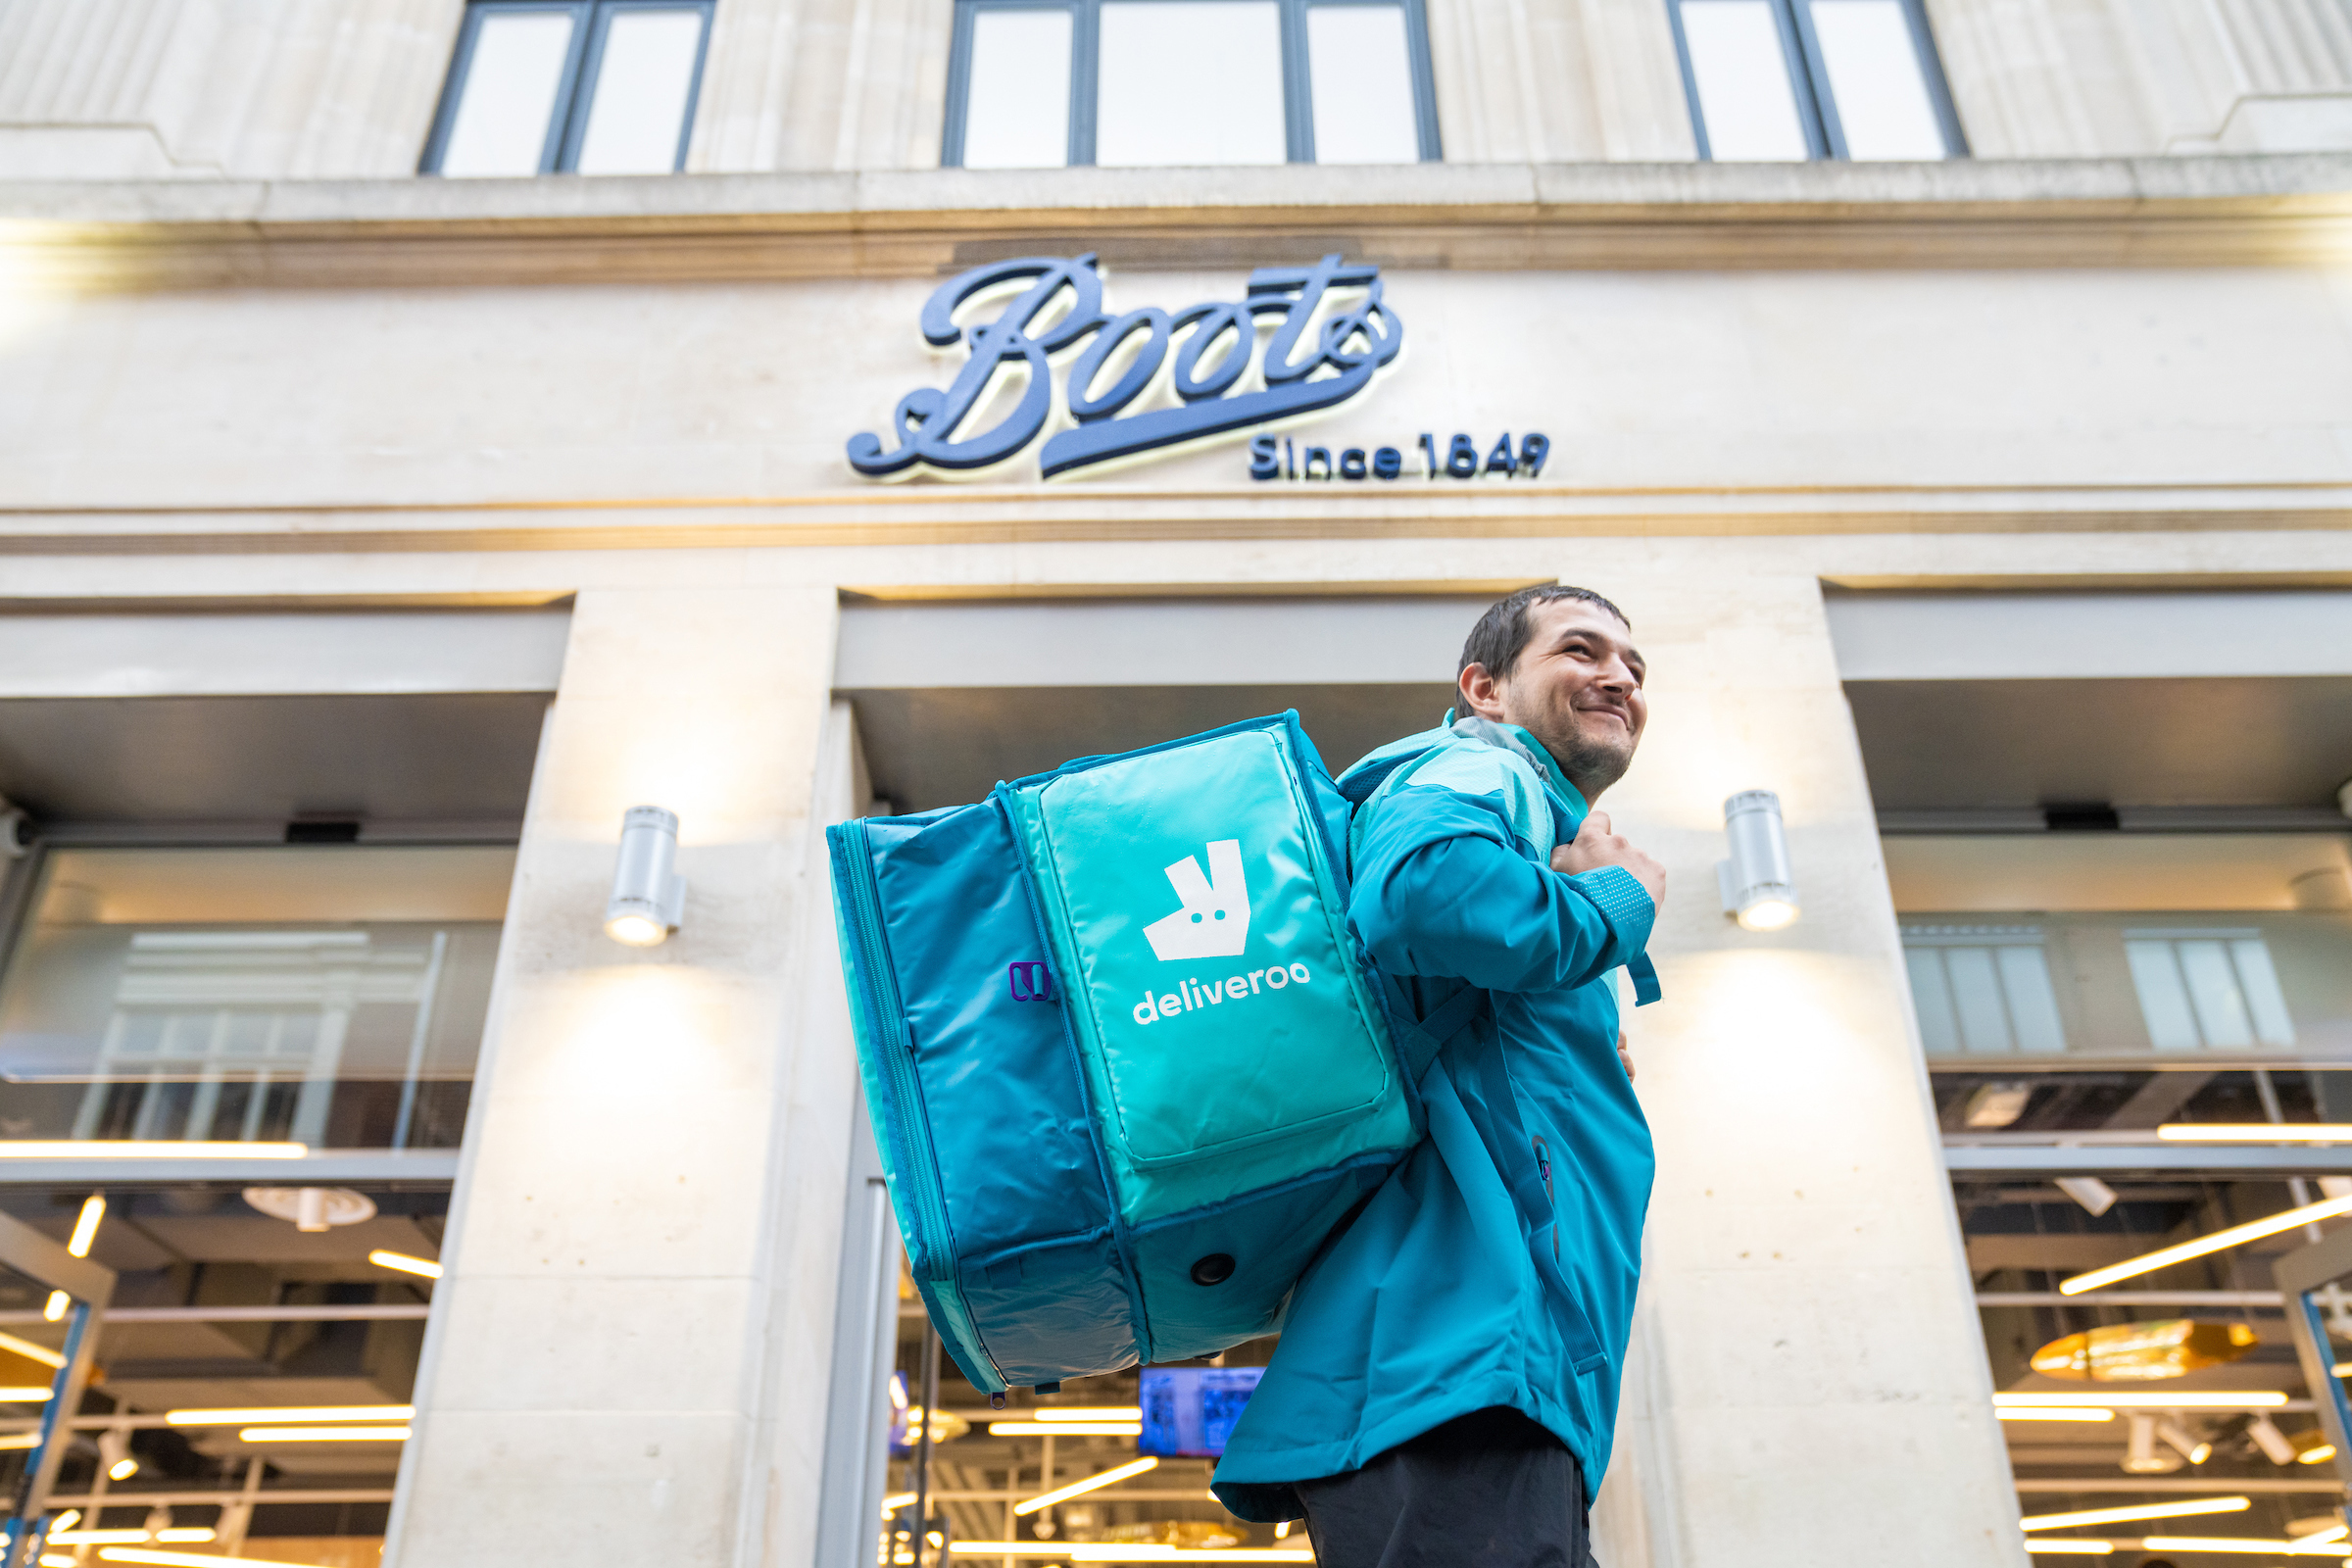 Video – Boots expands Deliveroo service to 125 stores